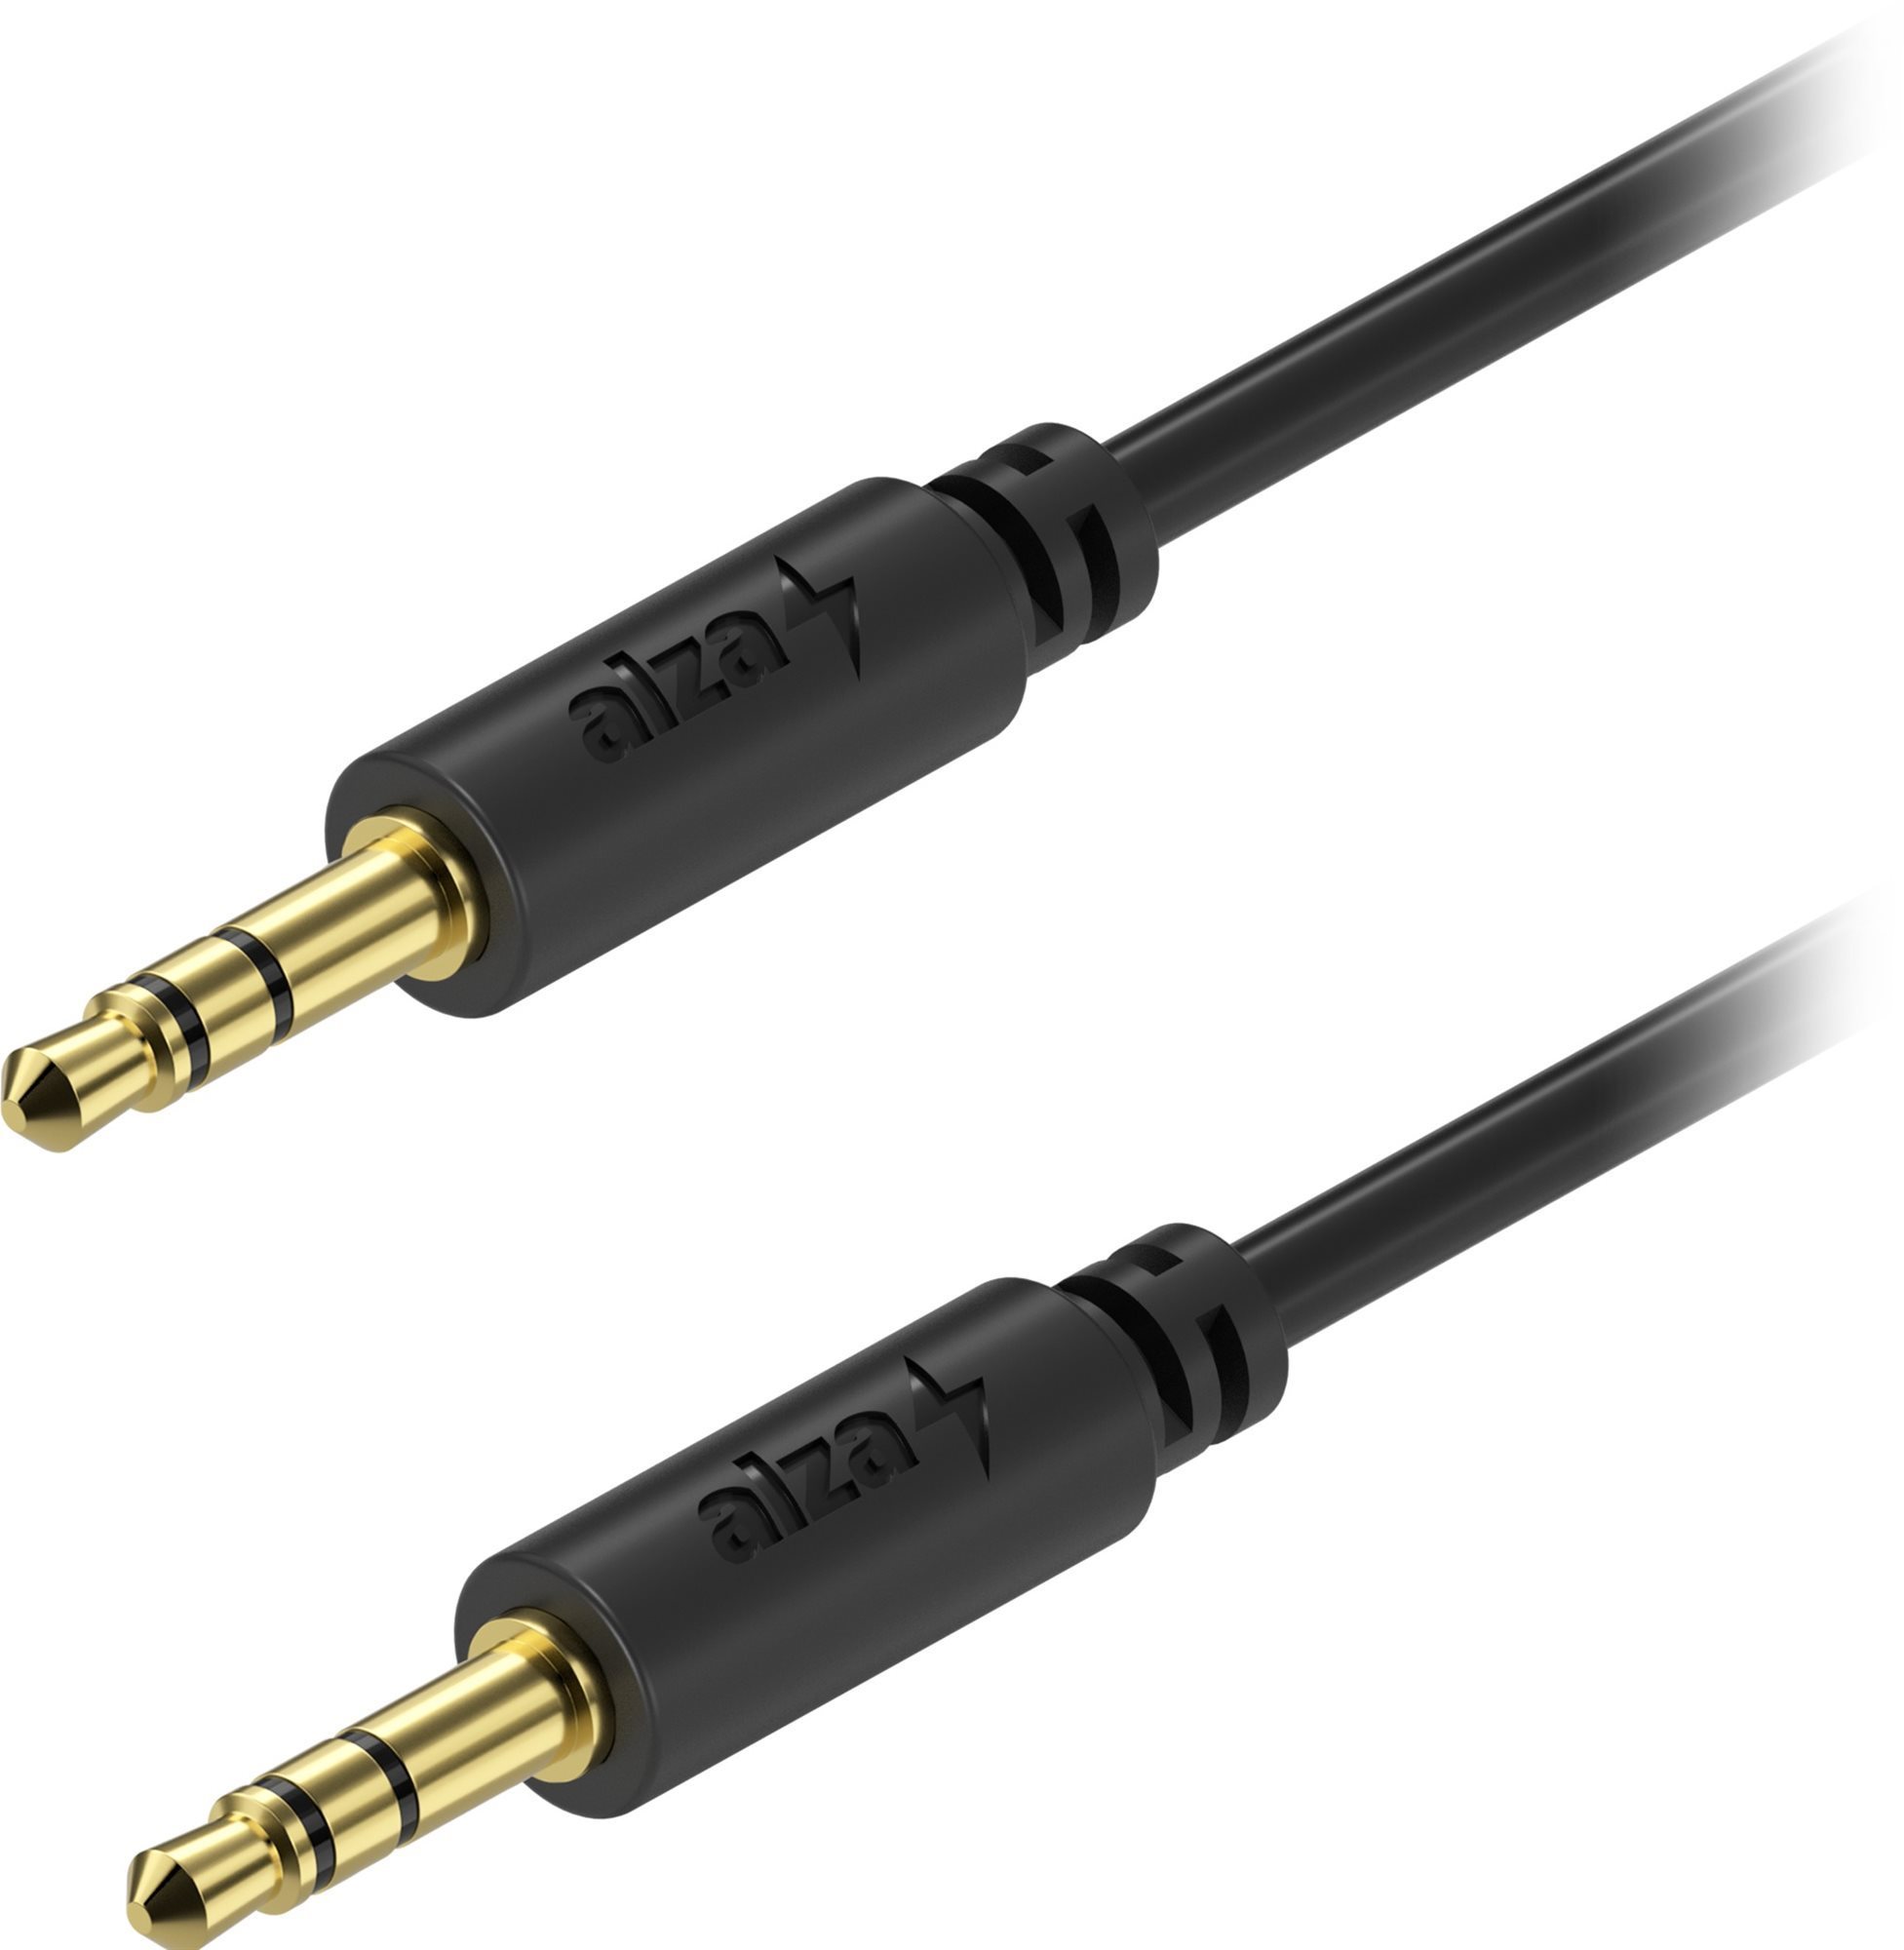 AlzaPower Core Audio 3,5 mm Jack (M) to 3,5 mm Jack (M) 1 m fekete